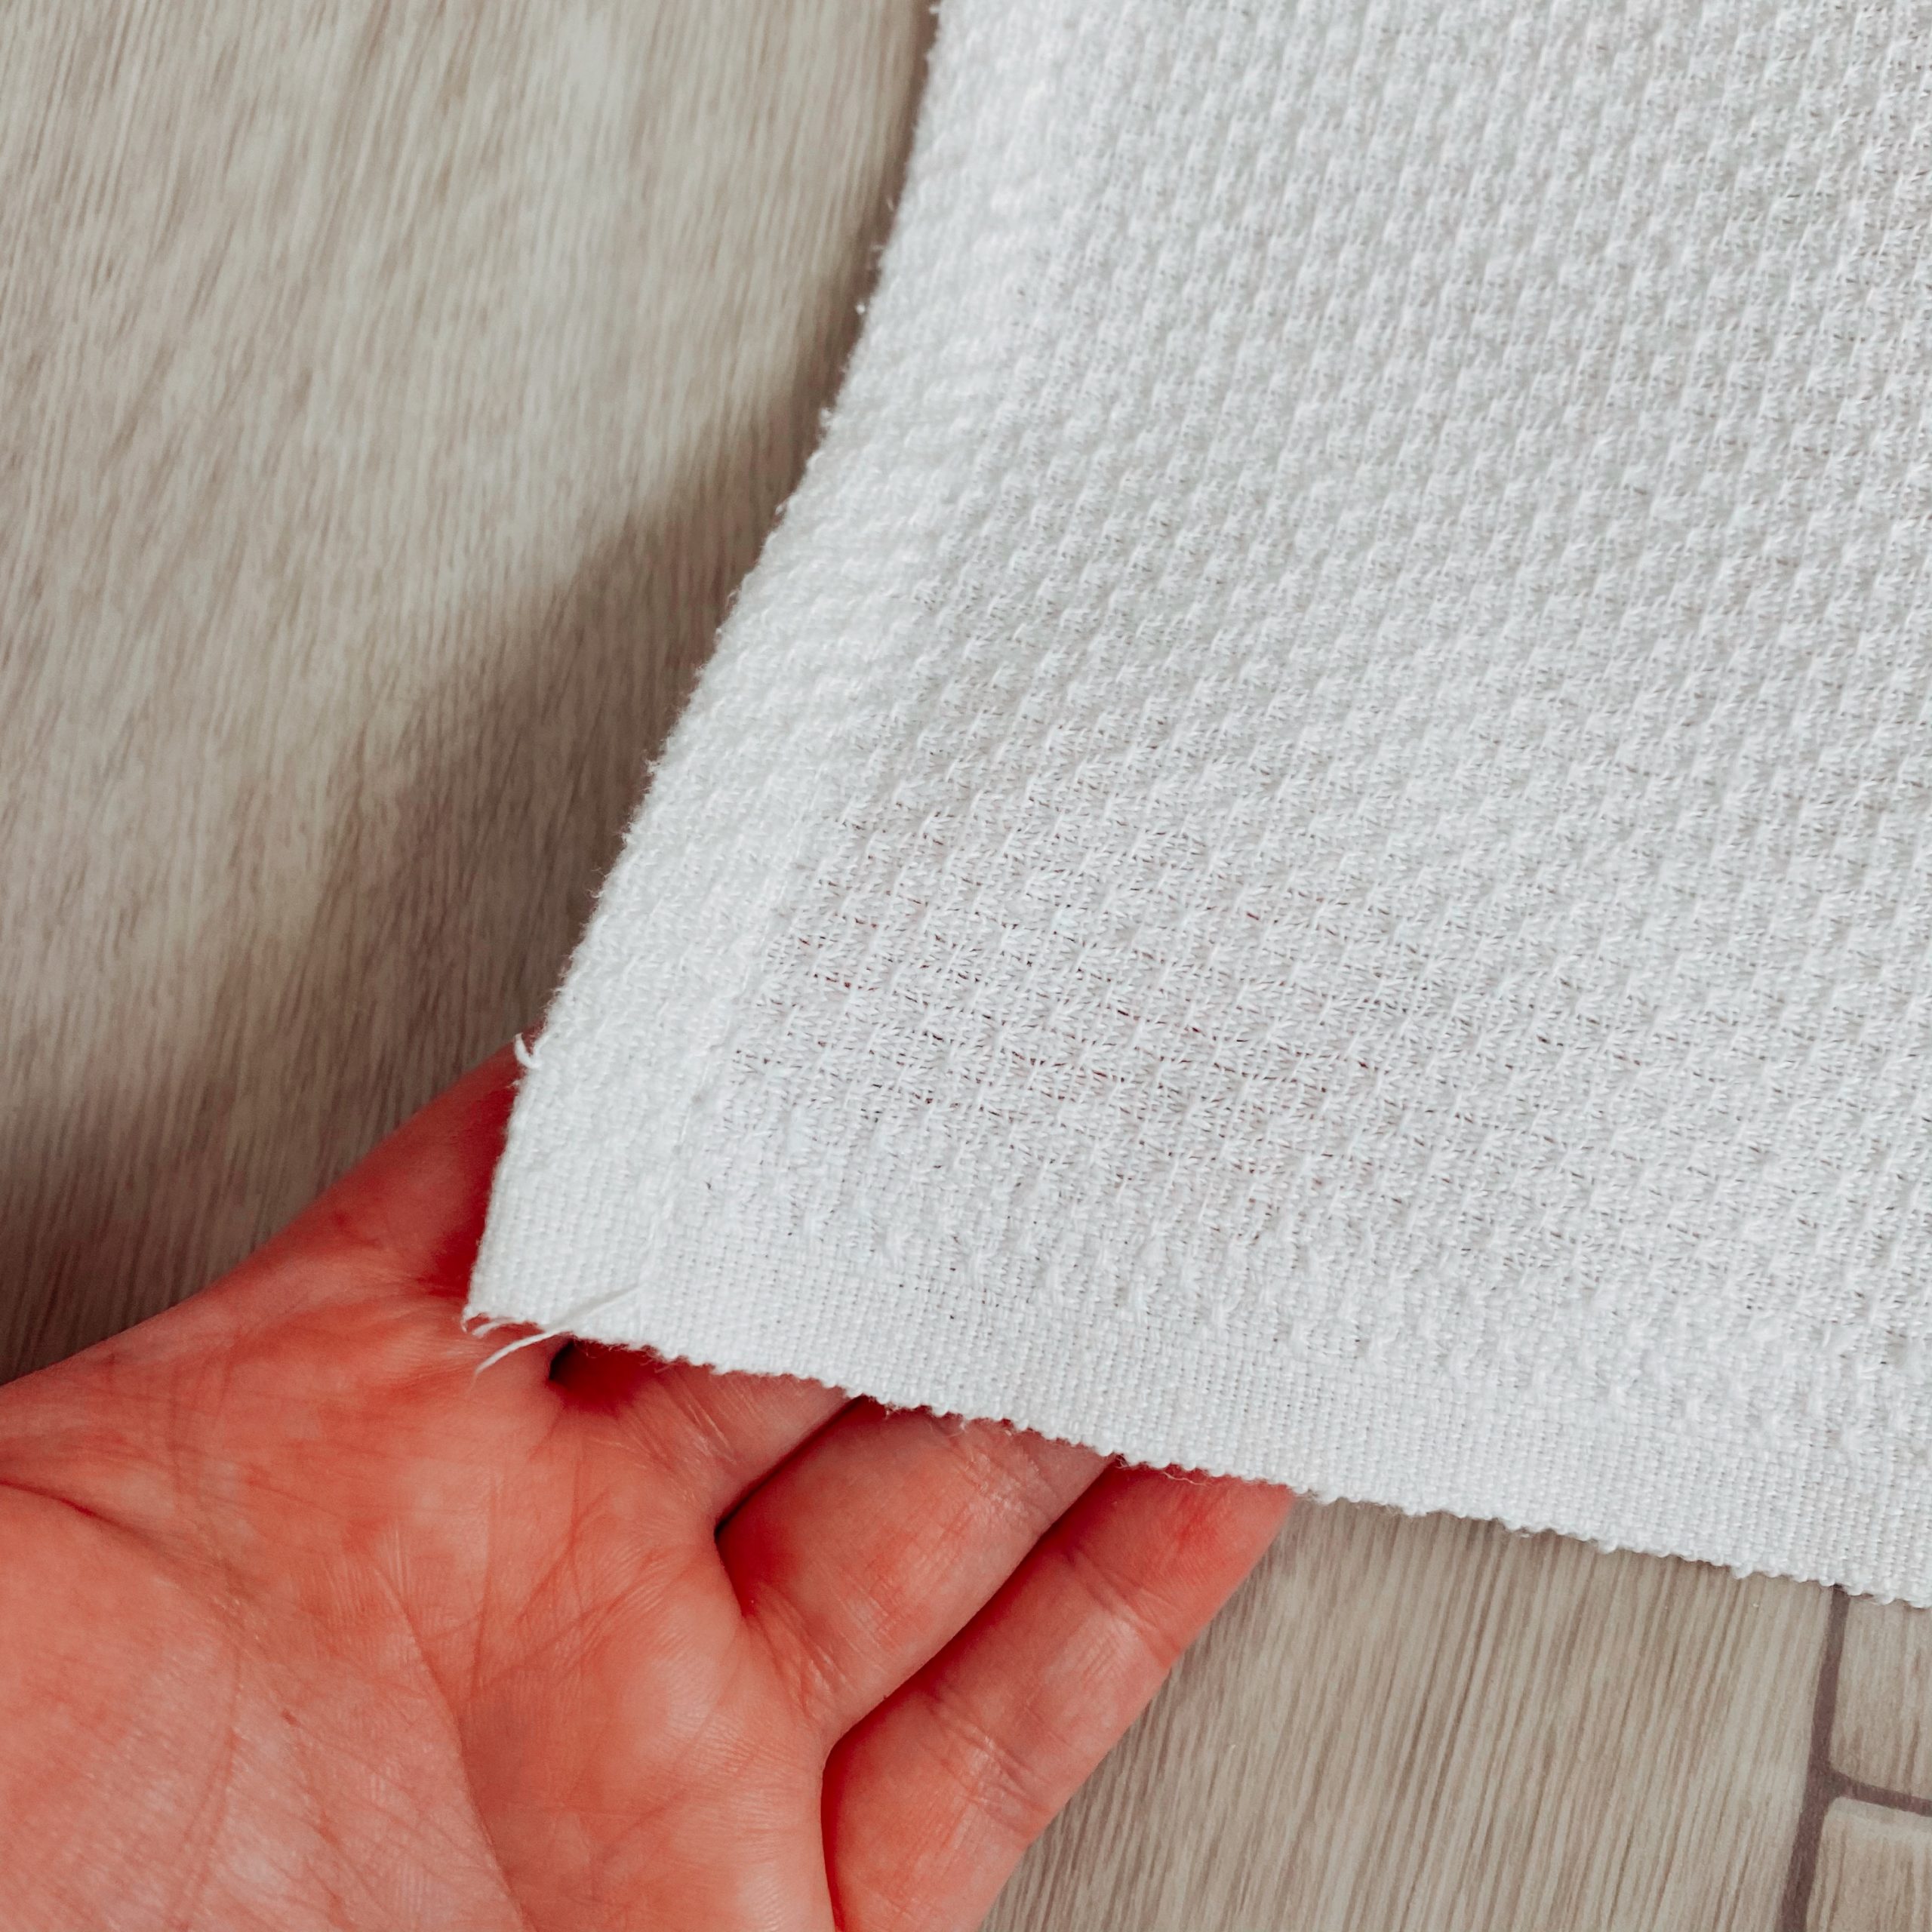 Cotton White Huck Towel Perfect for Embroidery